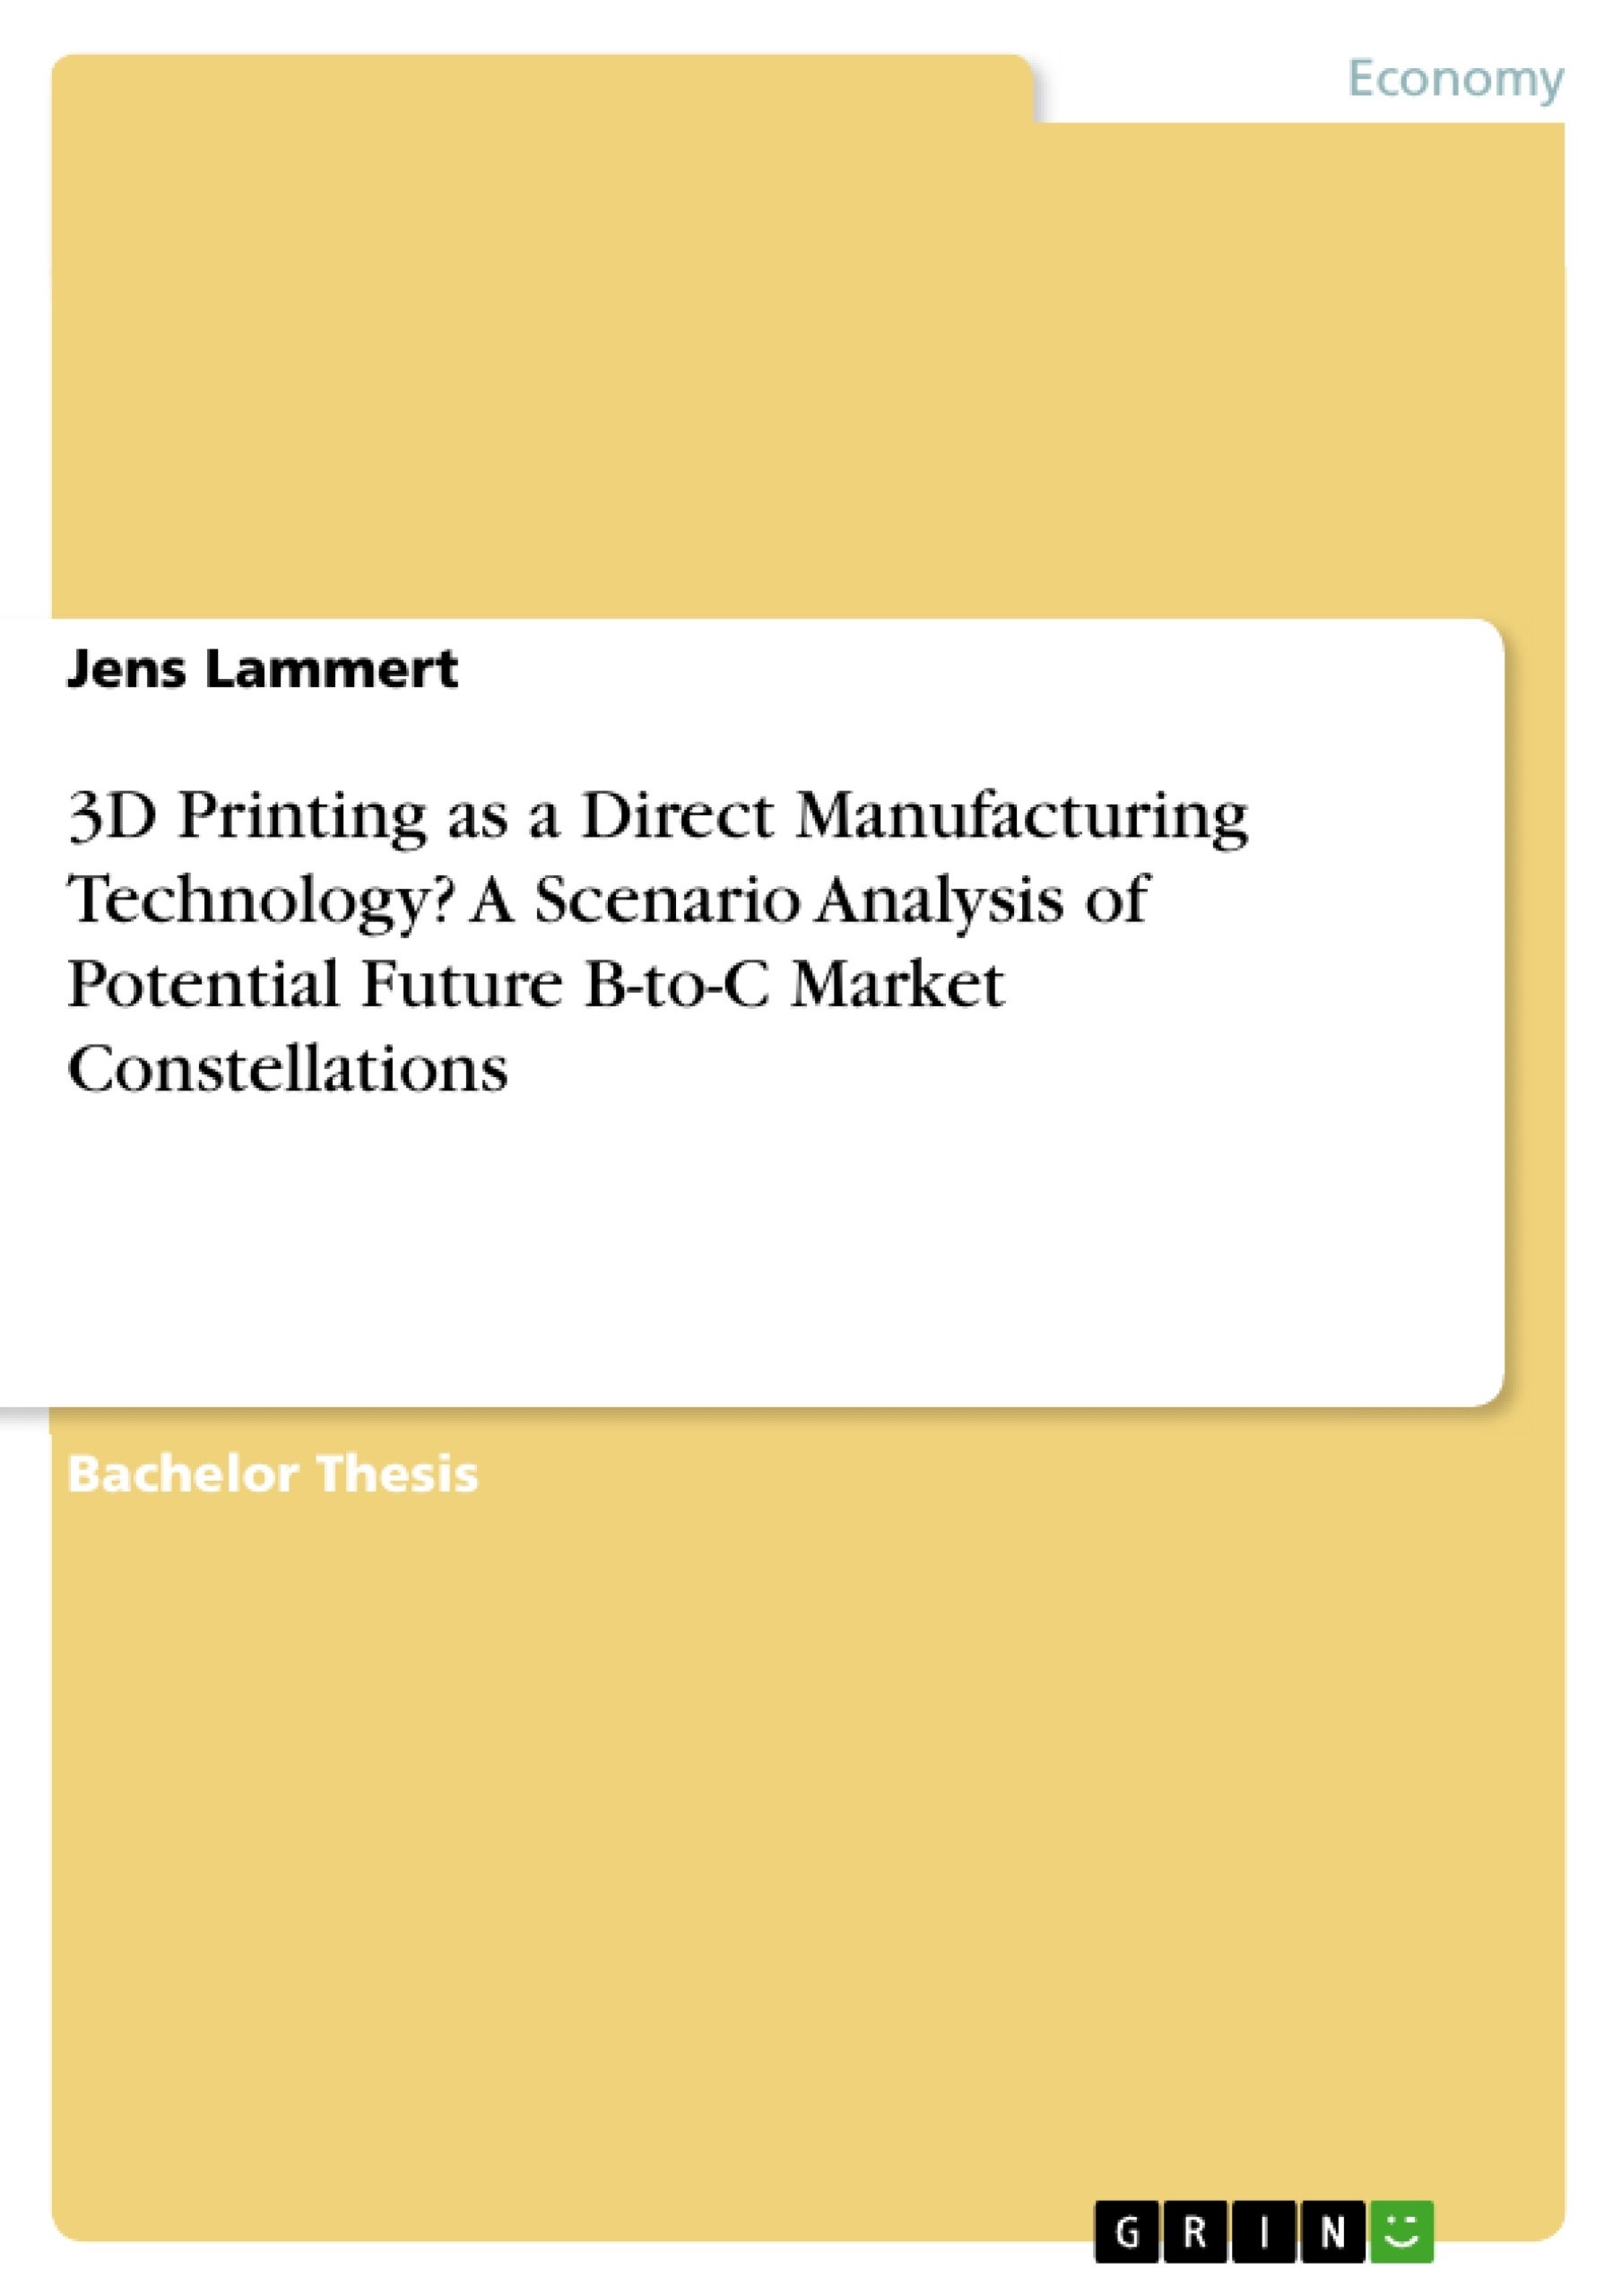 Título: 3D Printing as a Direct Manufacturing Technology? A Scenario Analysis of Potential Future B-to-C Market Constellations